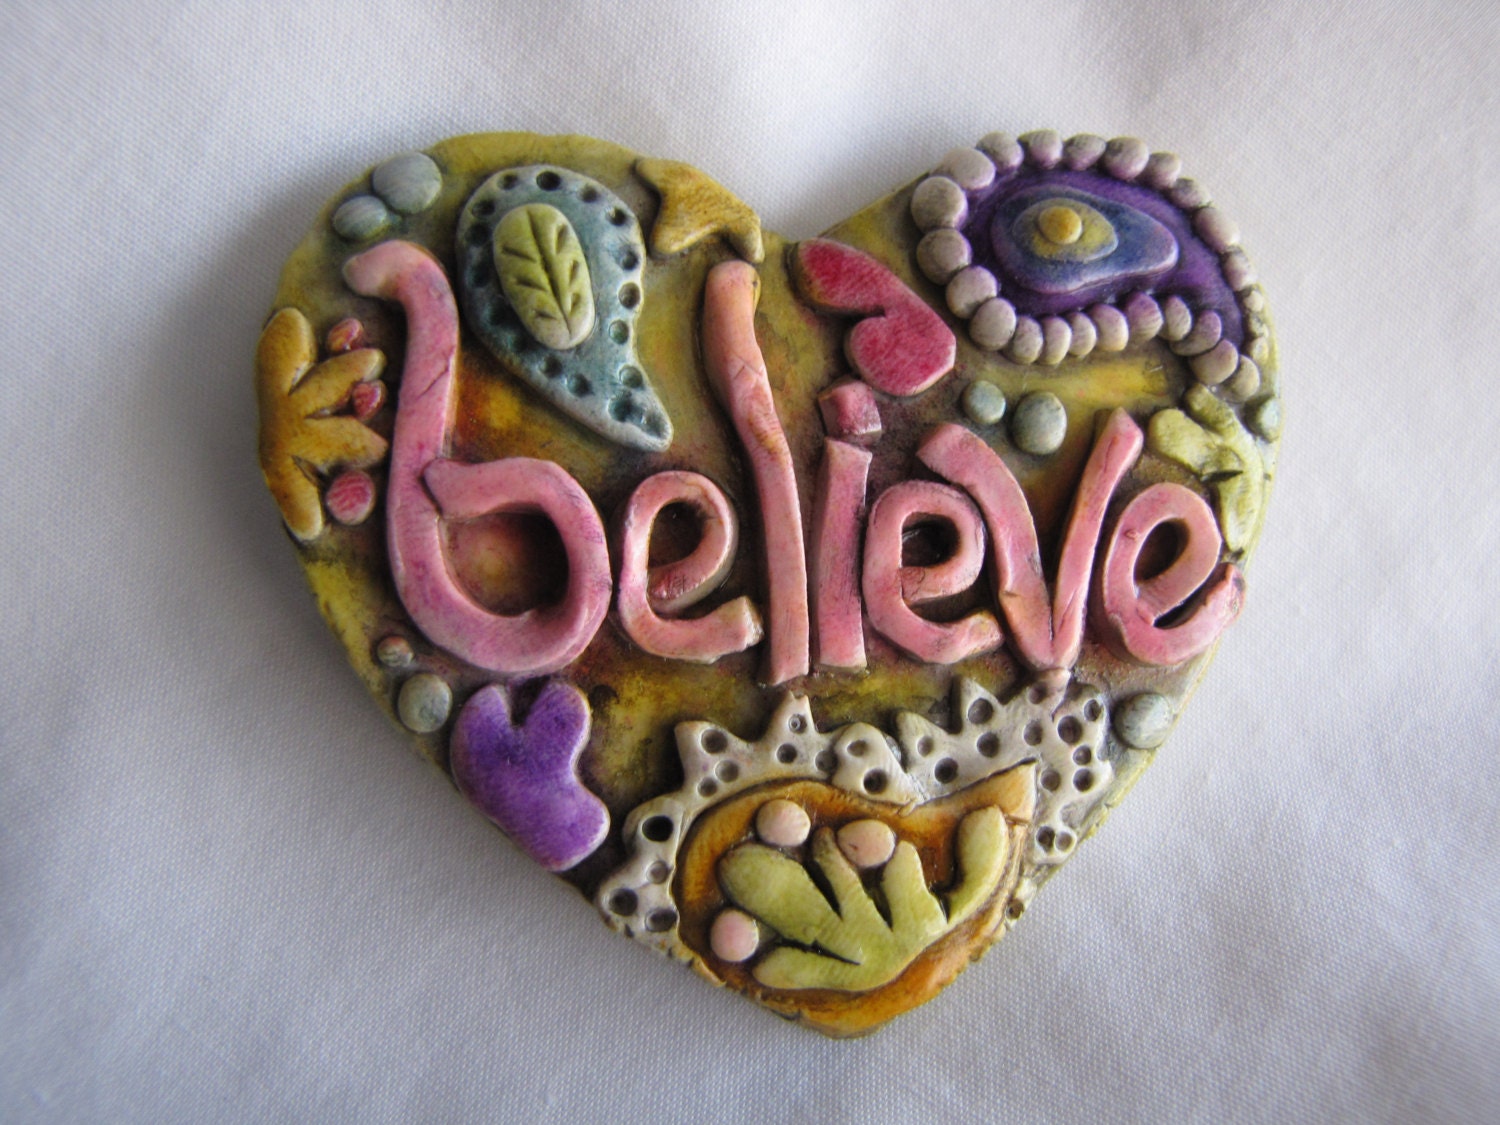 Believe magnet paisley pattern antiqued polymer clay - walkercrafts